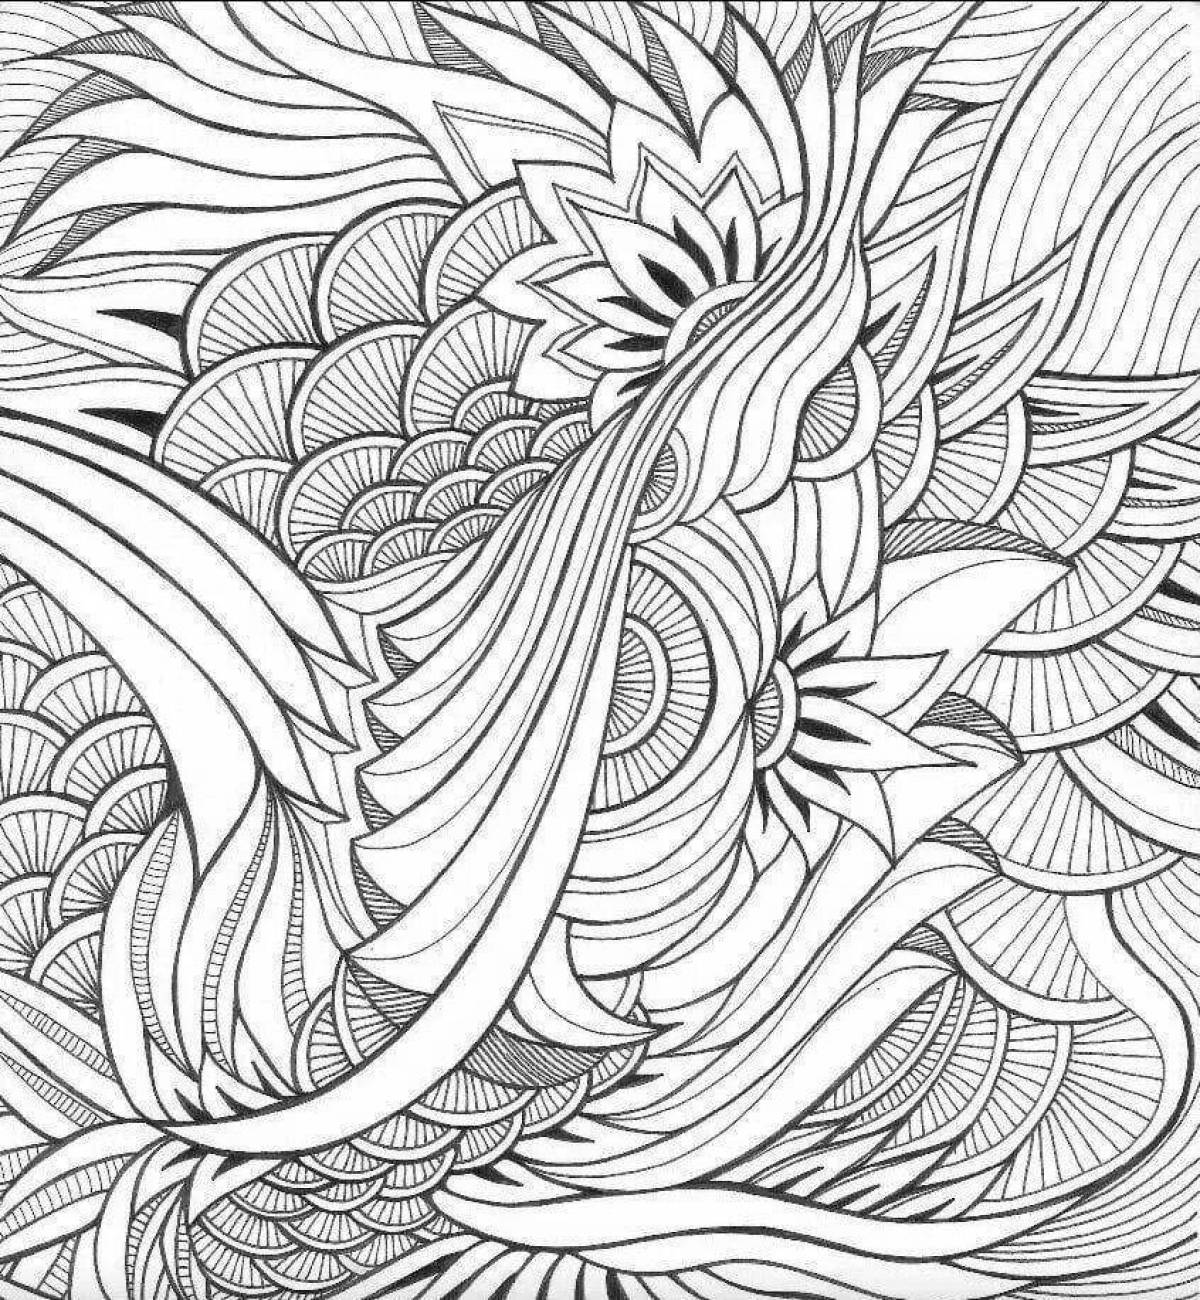 Coloring page with colorful pattern